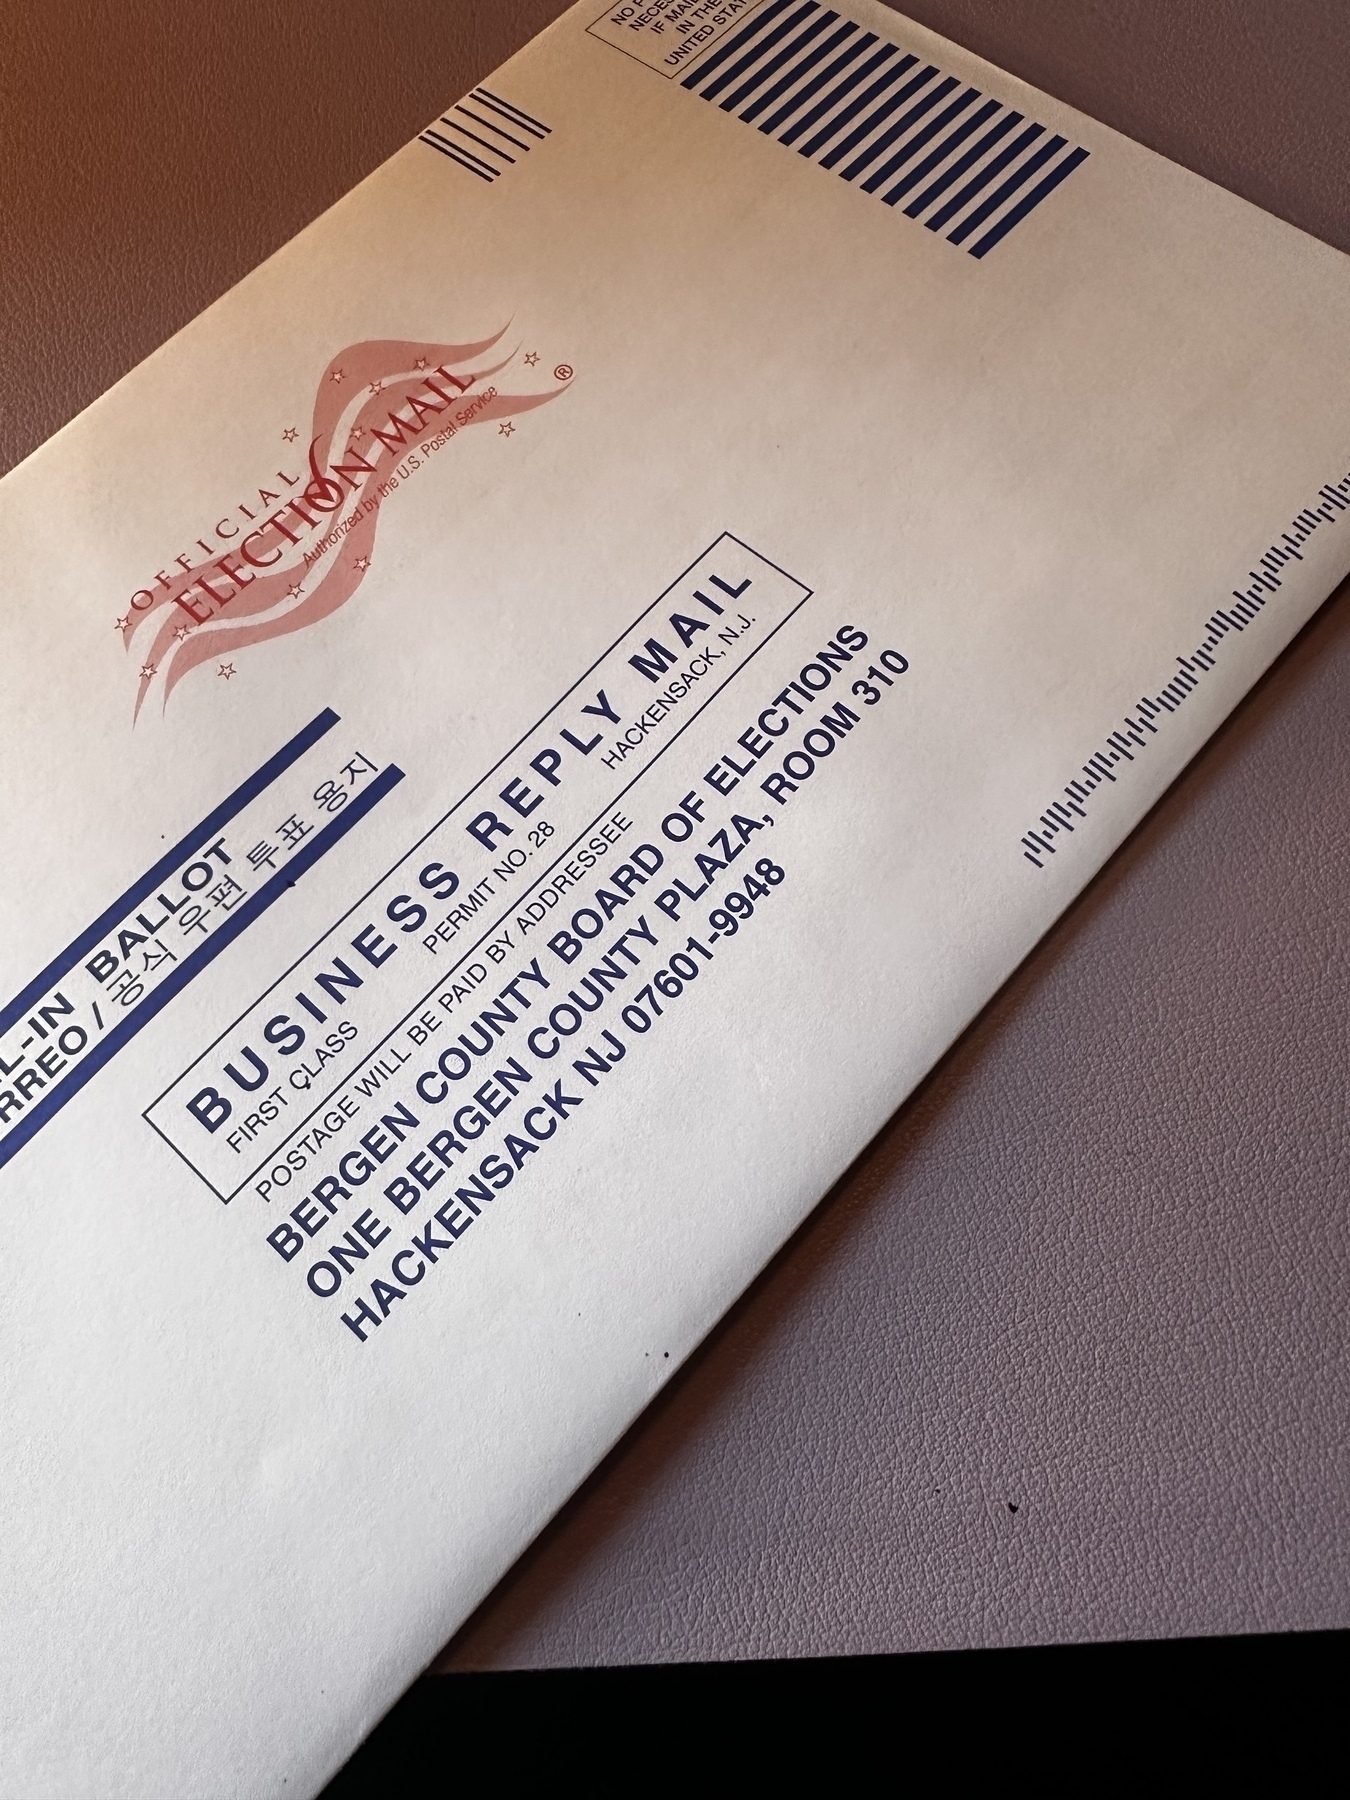 Envelope sat on a Desk. Desk mat is lavender. Envelope is diagonal to frame. It is a white envelope with blue font. It is indoors. &10;&10;BALLOT&10;BUSINESS REPLY MAIL&10;FIRST CLASS&10;PERMIT NO. 28&10;HACKENSACK, N.J.&10;POSTAGE WILL BE PAID BY ADDRESSEE&10;BERGEN COUNTY BOARD OF ELECTIONS&10;ONE BERGEN COUNTY PLAZA, ROOM 310&10;HACKENSACK NJ 07601-9948&10;